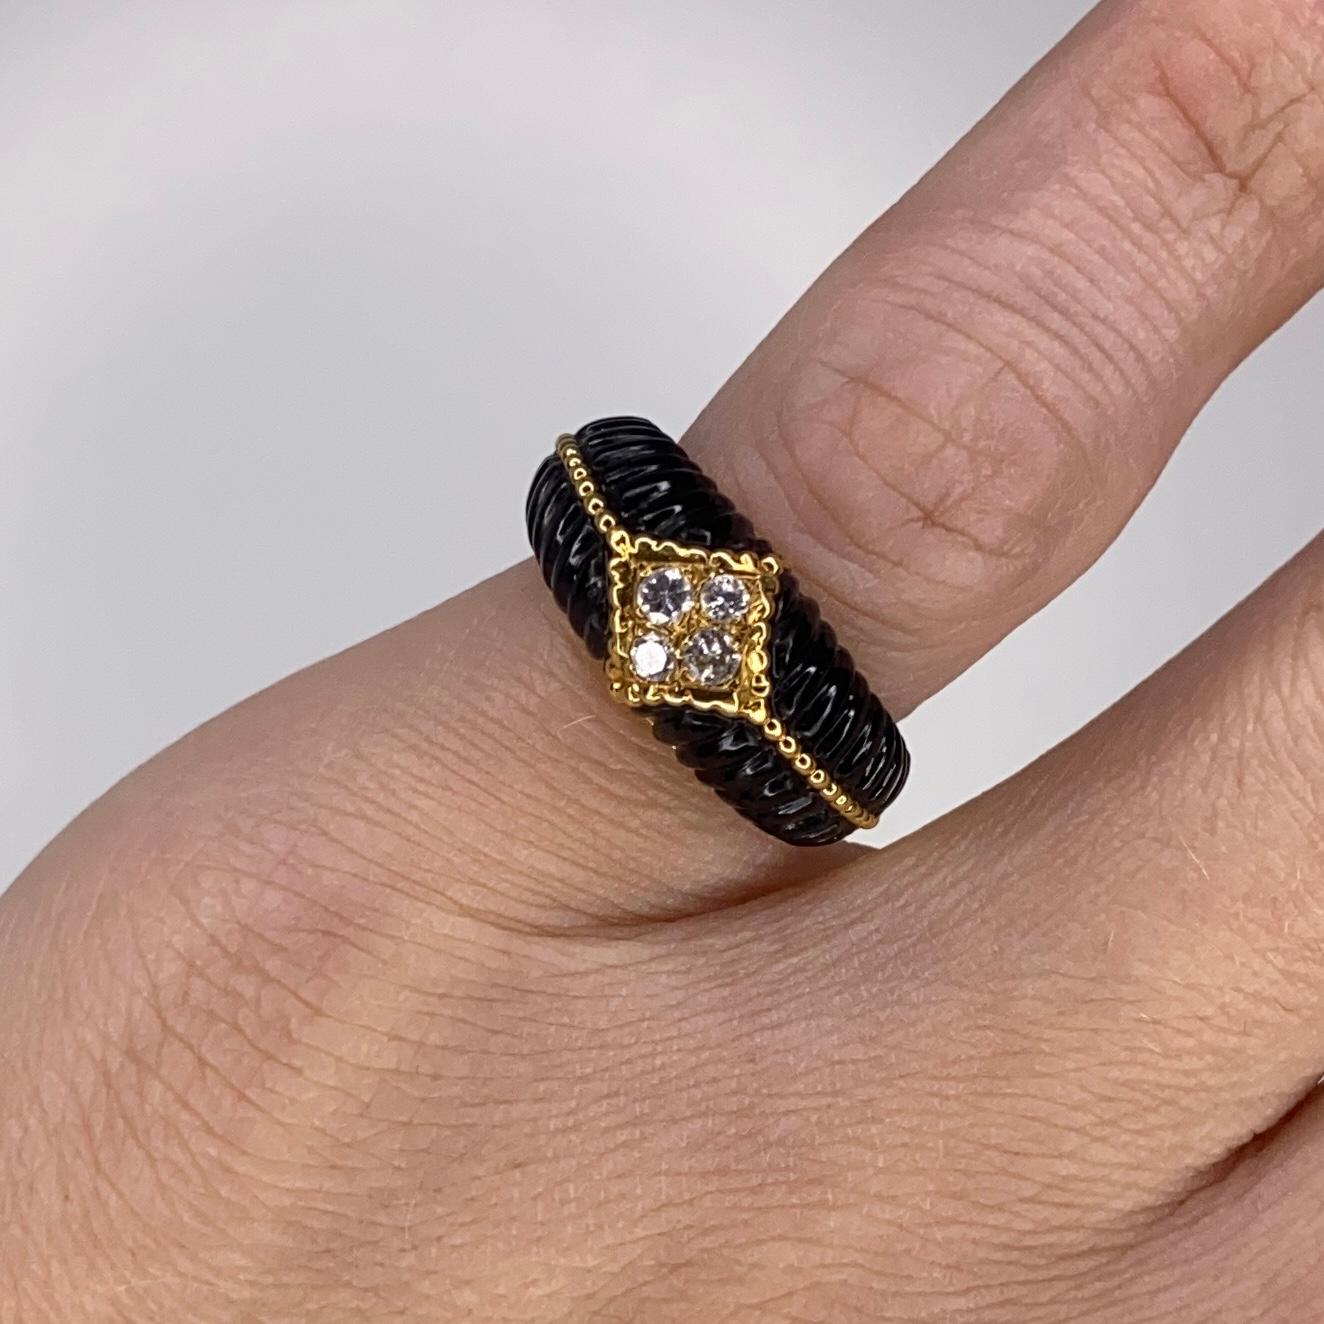 Women's Van Cleef & Arpels 1970 Paris Fluted Onyx Ring in 18Kt Yellow Gold with Diamonds